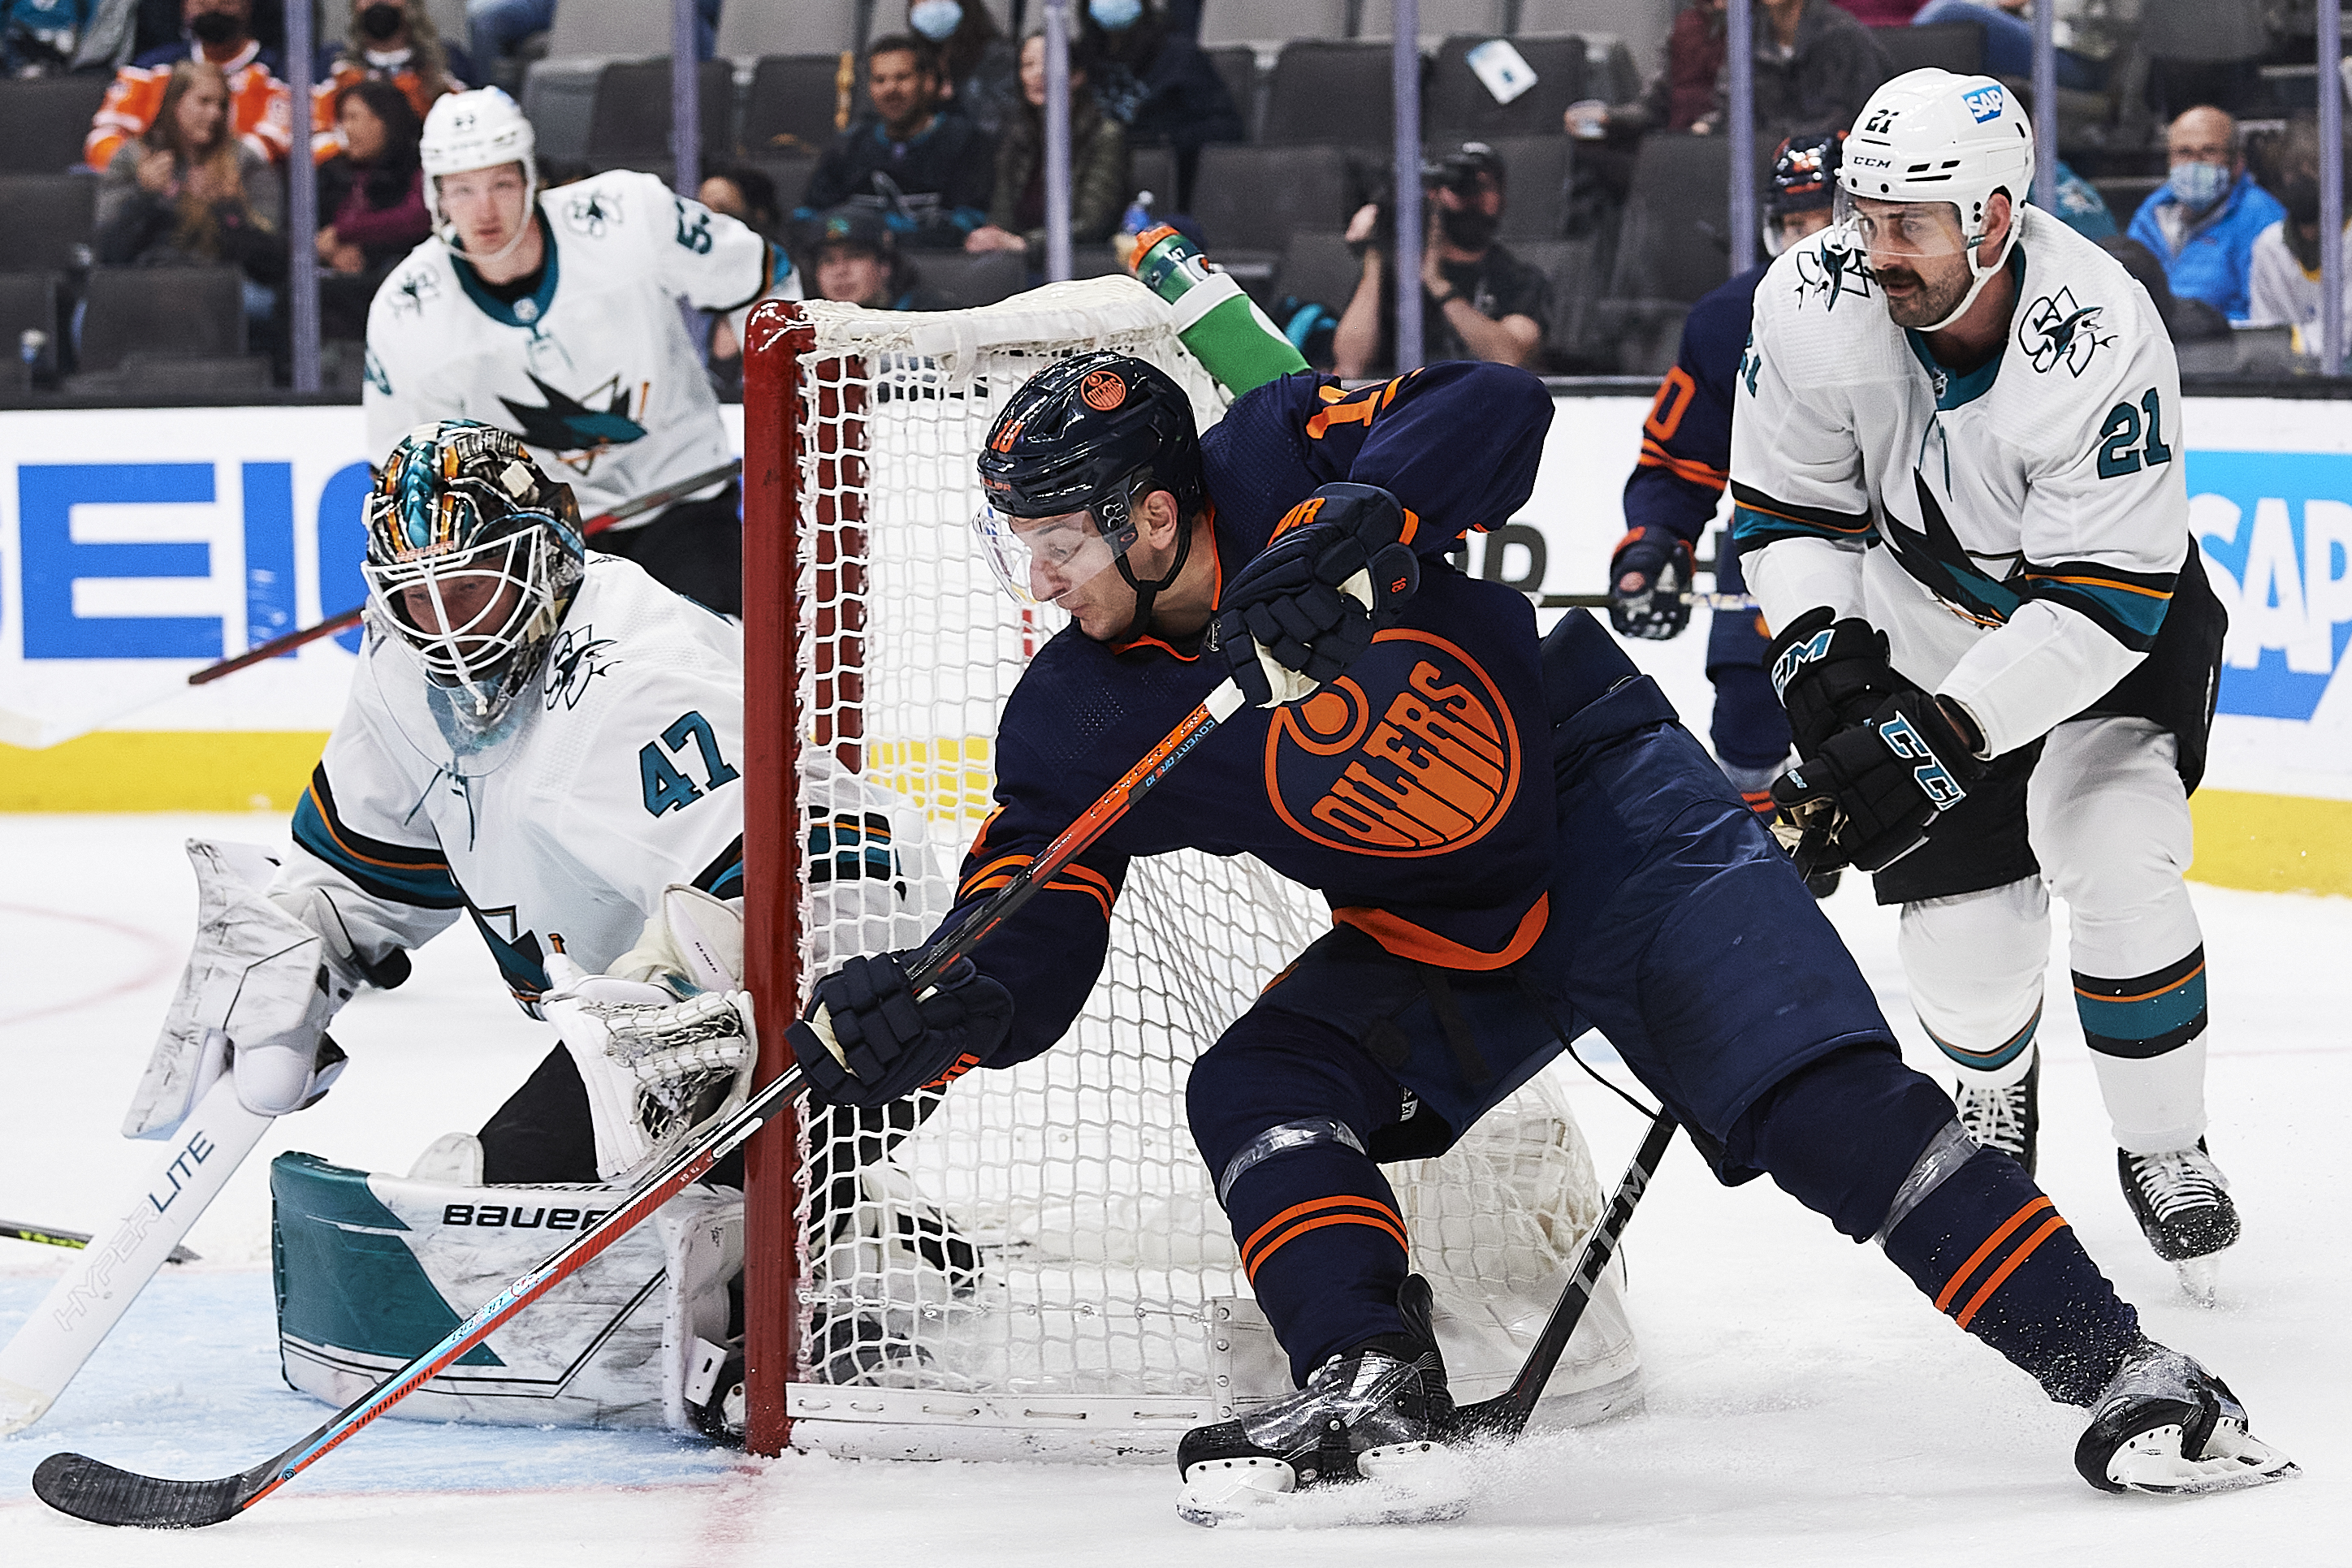 Edmonton Oilers left wing Zach Hyman (18) tries a wraparound during the NHL game between the San Jose Sharks and the Edmonton Oilers on February 14, 2022 at SAP Center in San Jose, CA.